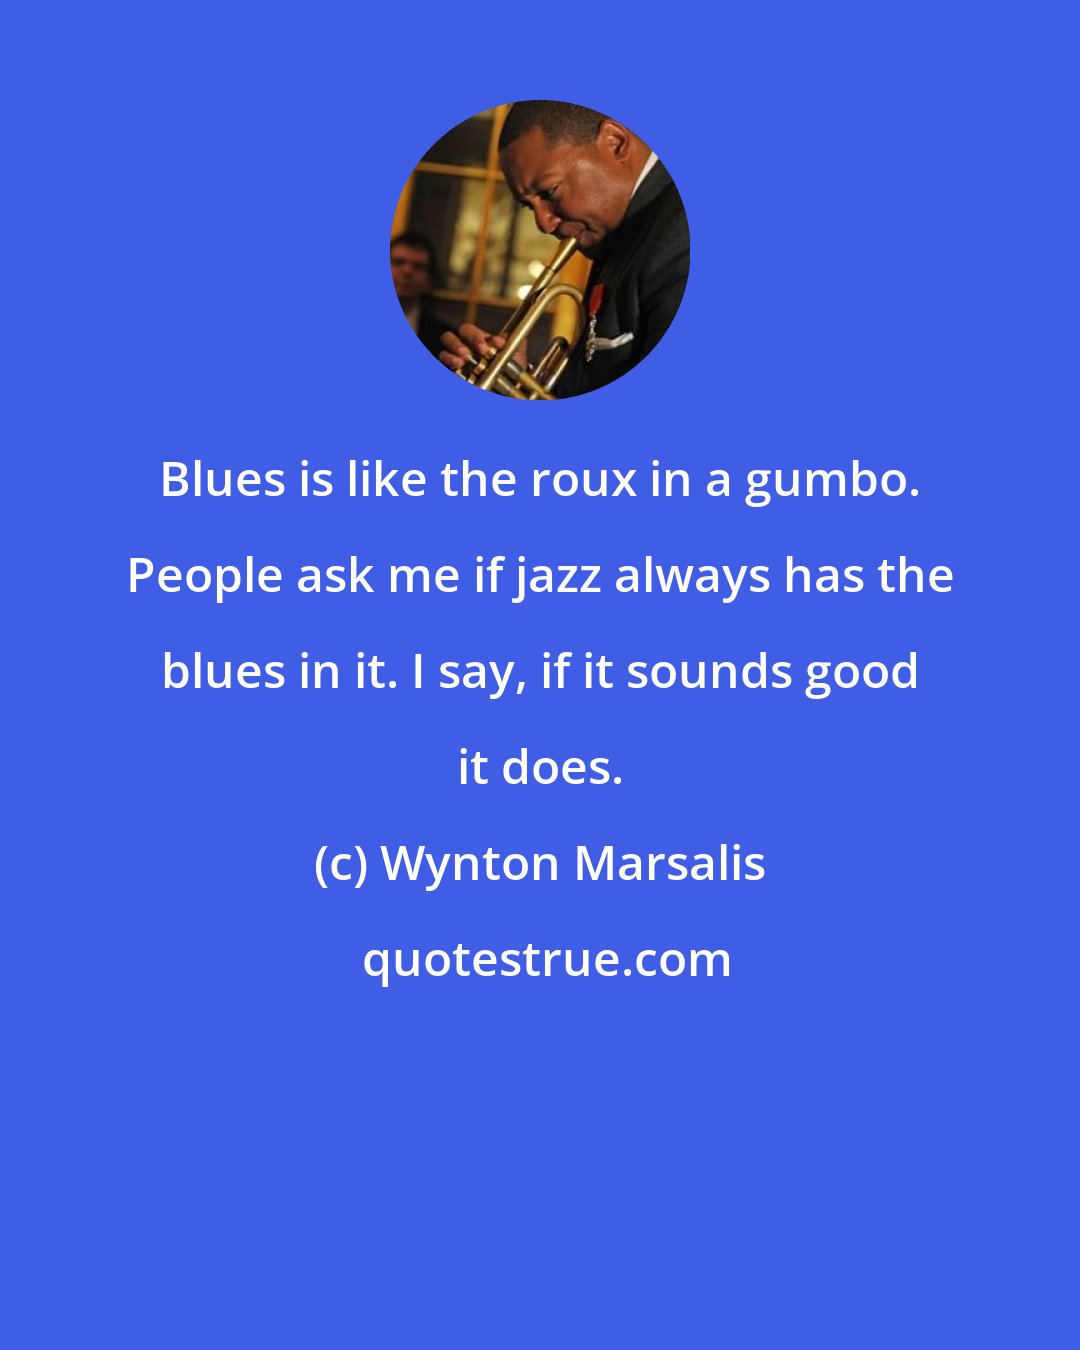 Wynton Marsalis: Blues is like the roux in a gumbo. People ask me if jazz always has the blues in it. I say, if it sounds good it does.